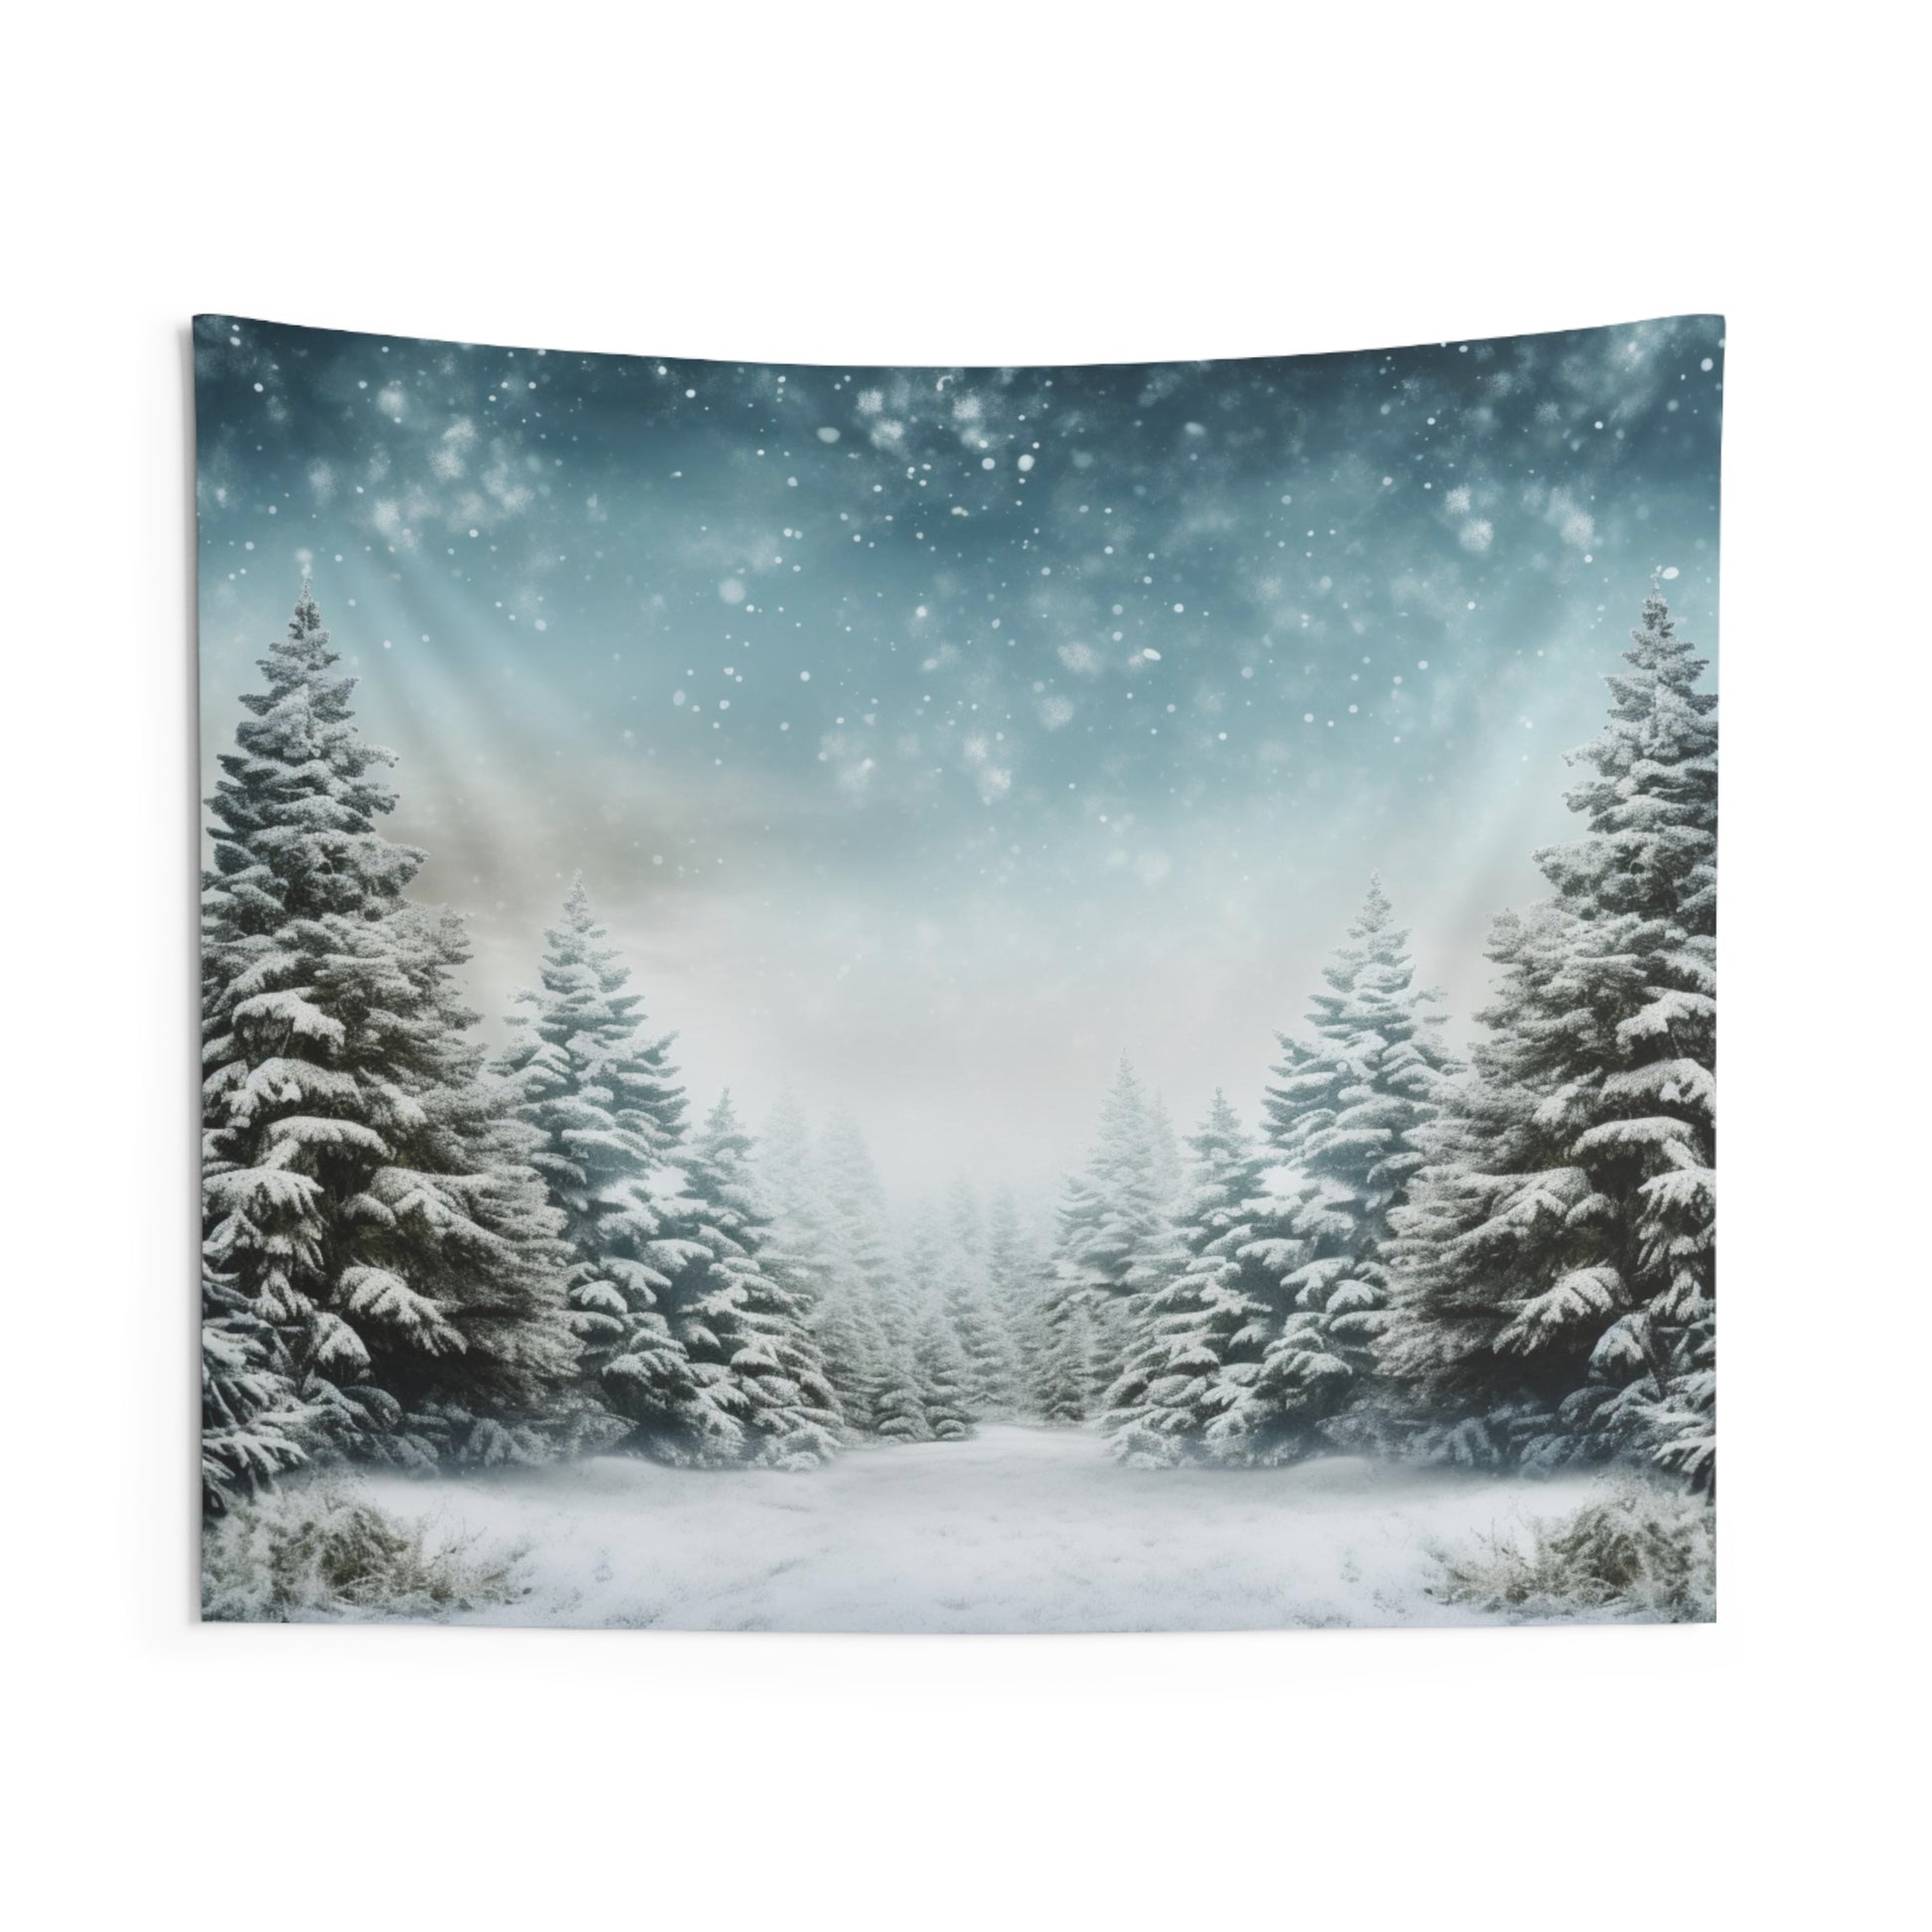 Winter Trees Tapestry, Pine Snowing Wall Art Hanging Cool Unique Landscape Aesthetic Large Small Decor Bedroom College Dorm Room Starcove Fashion